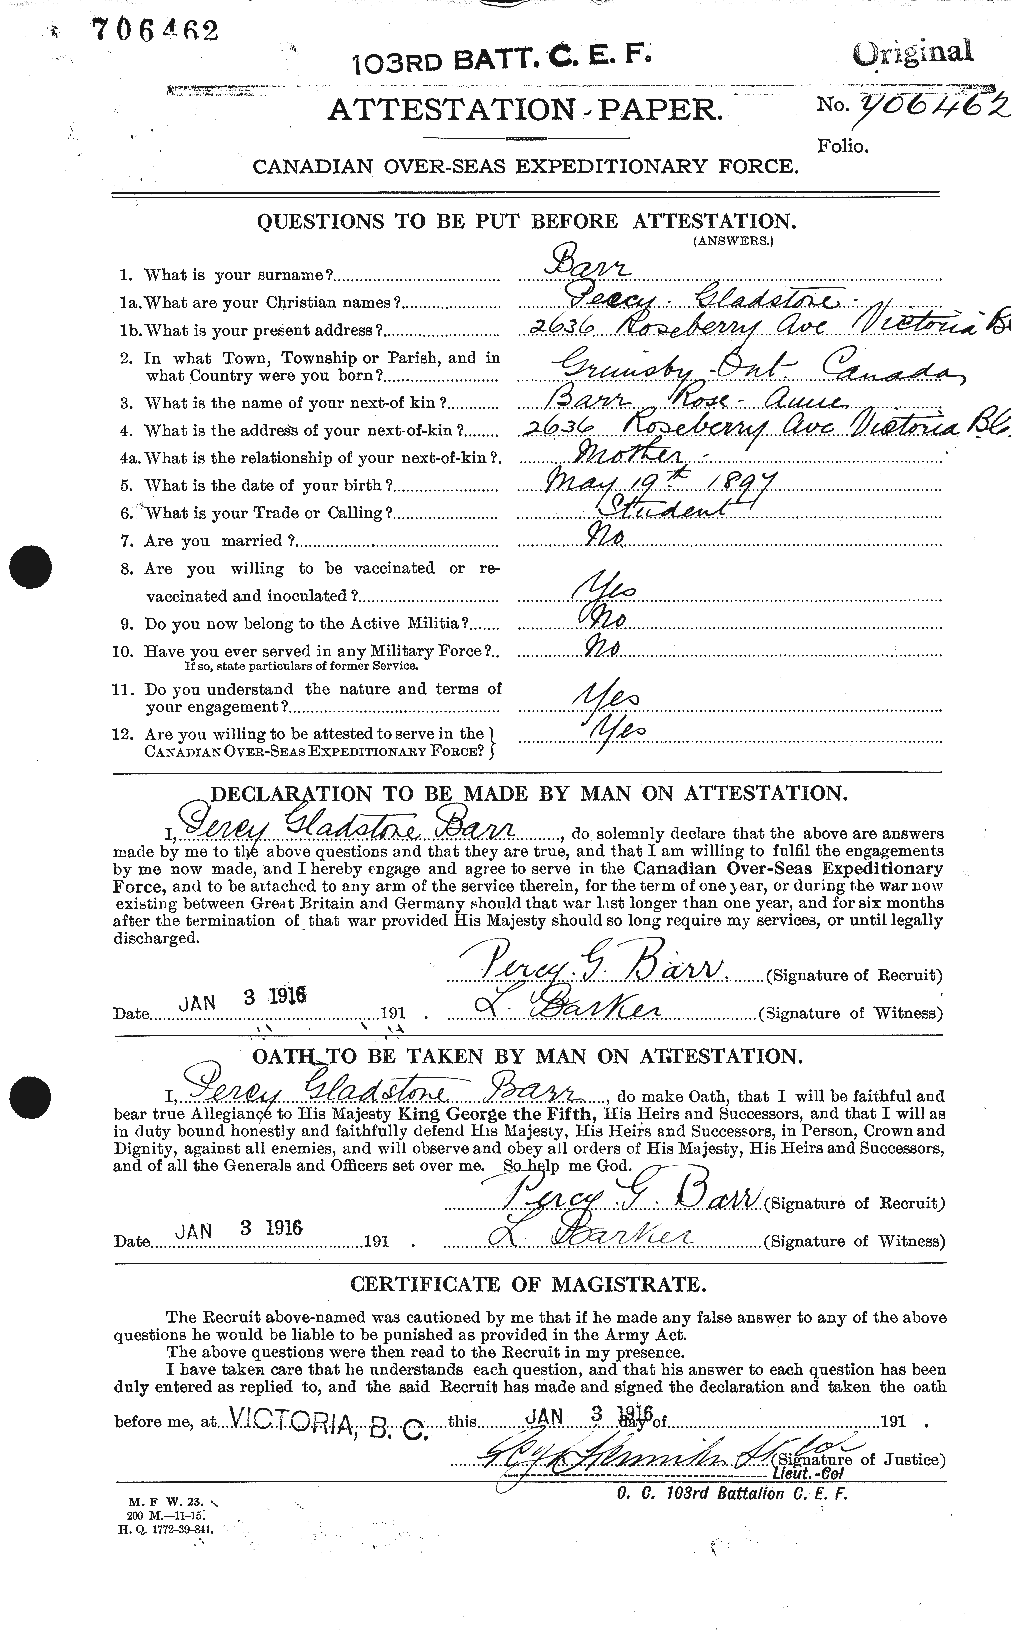 Personnel Records of the First World War - CEF 227887a